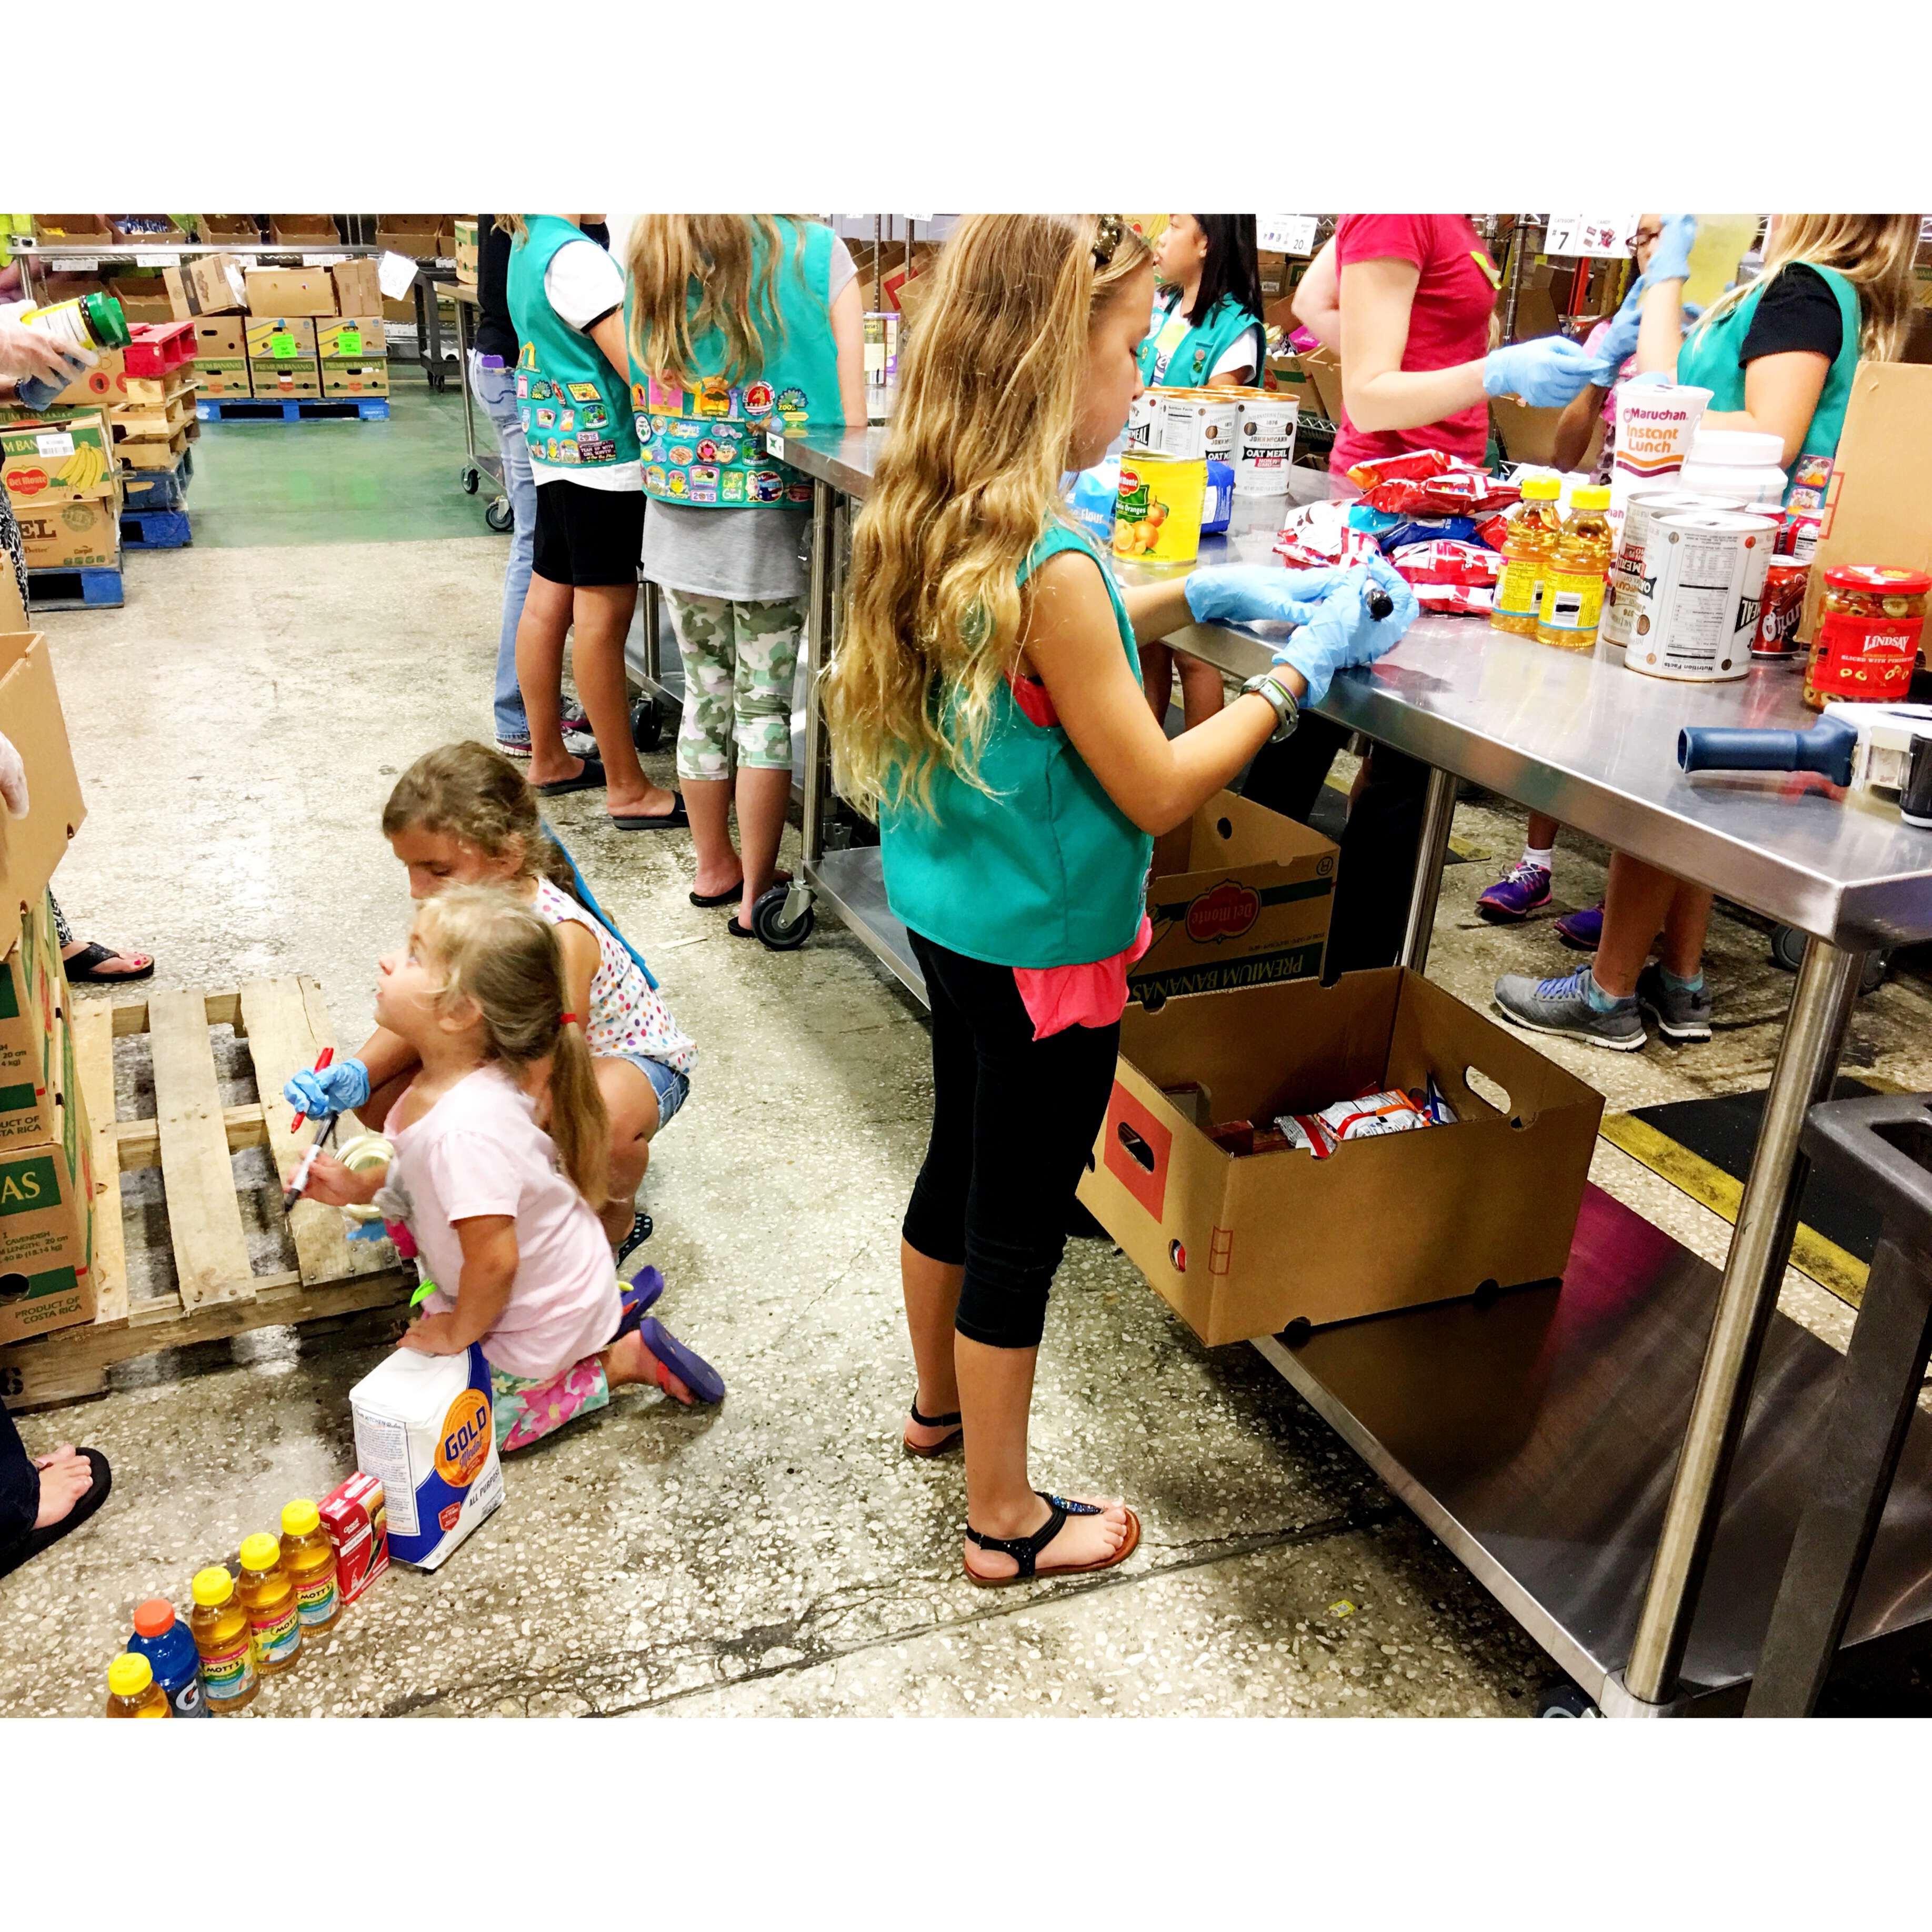 How Our Disney Kids Play Date Inspired us to Give Back